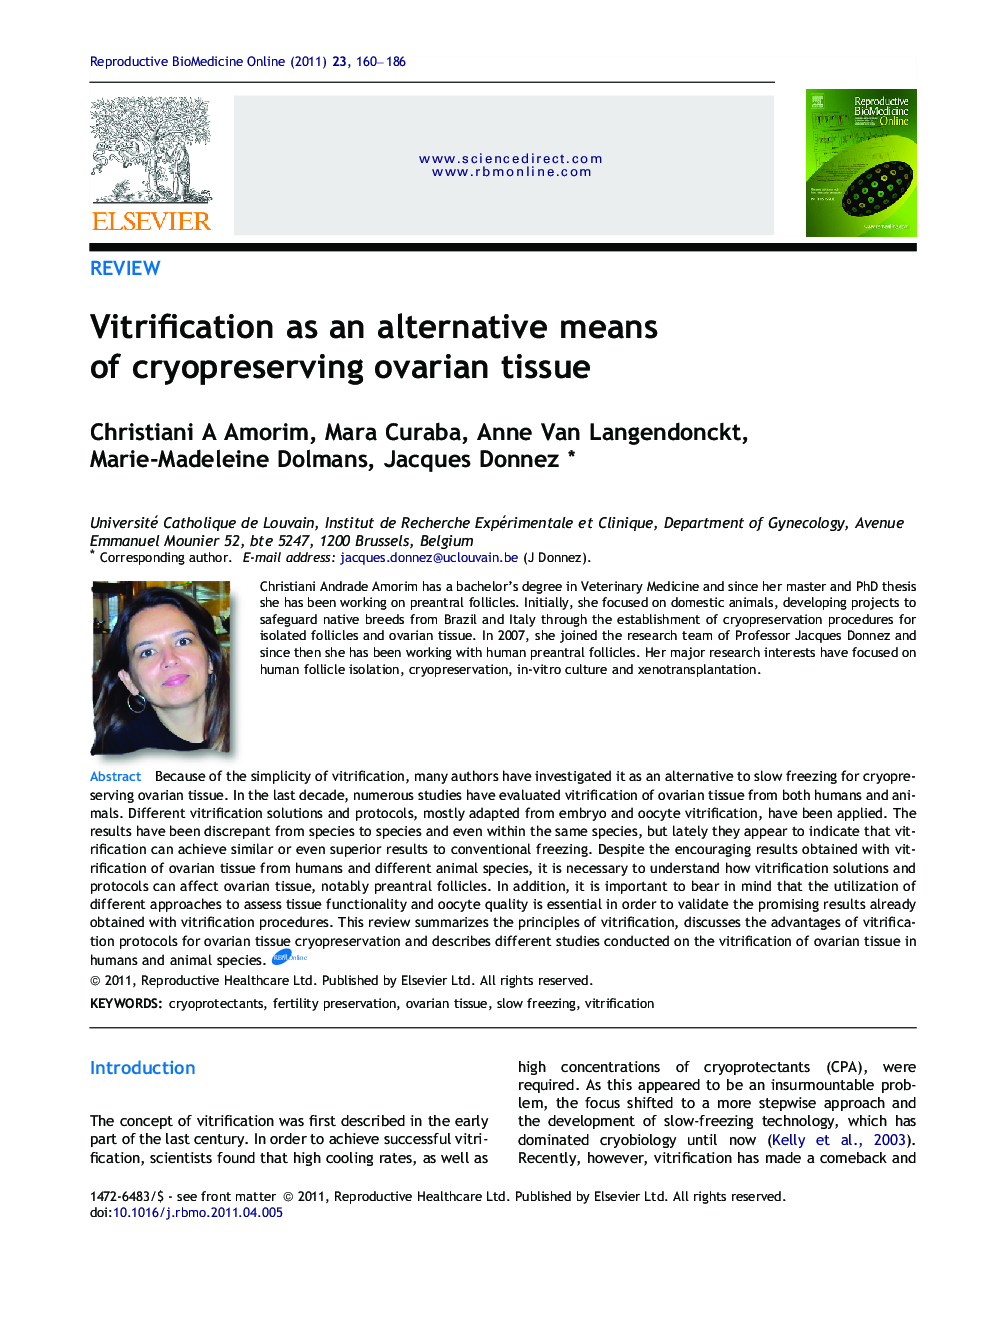 Vitrification as an alternative means of cryopreserving ovarian tissue